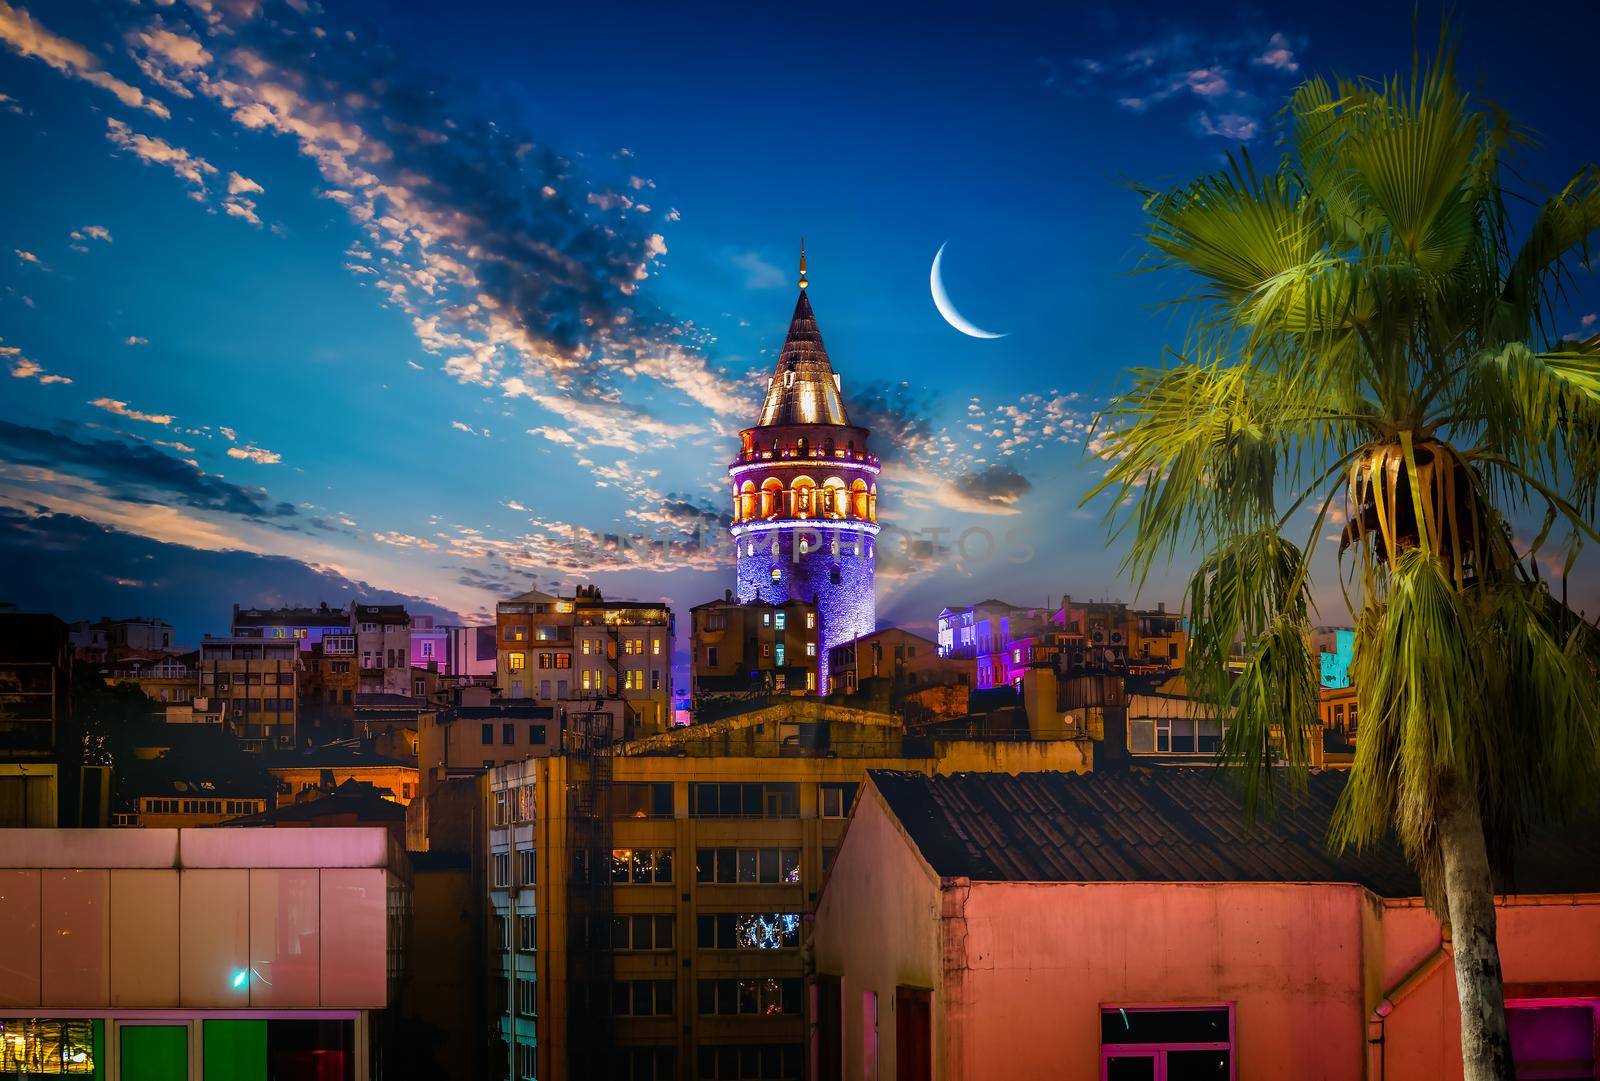 Galata Tower in Istanbul at night by Givaga